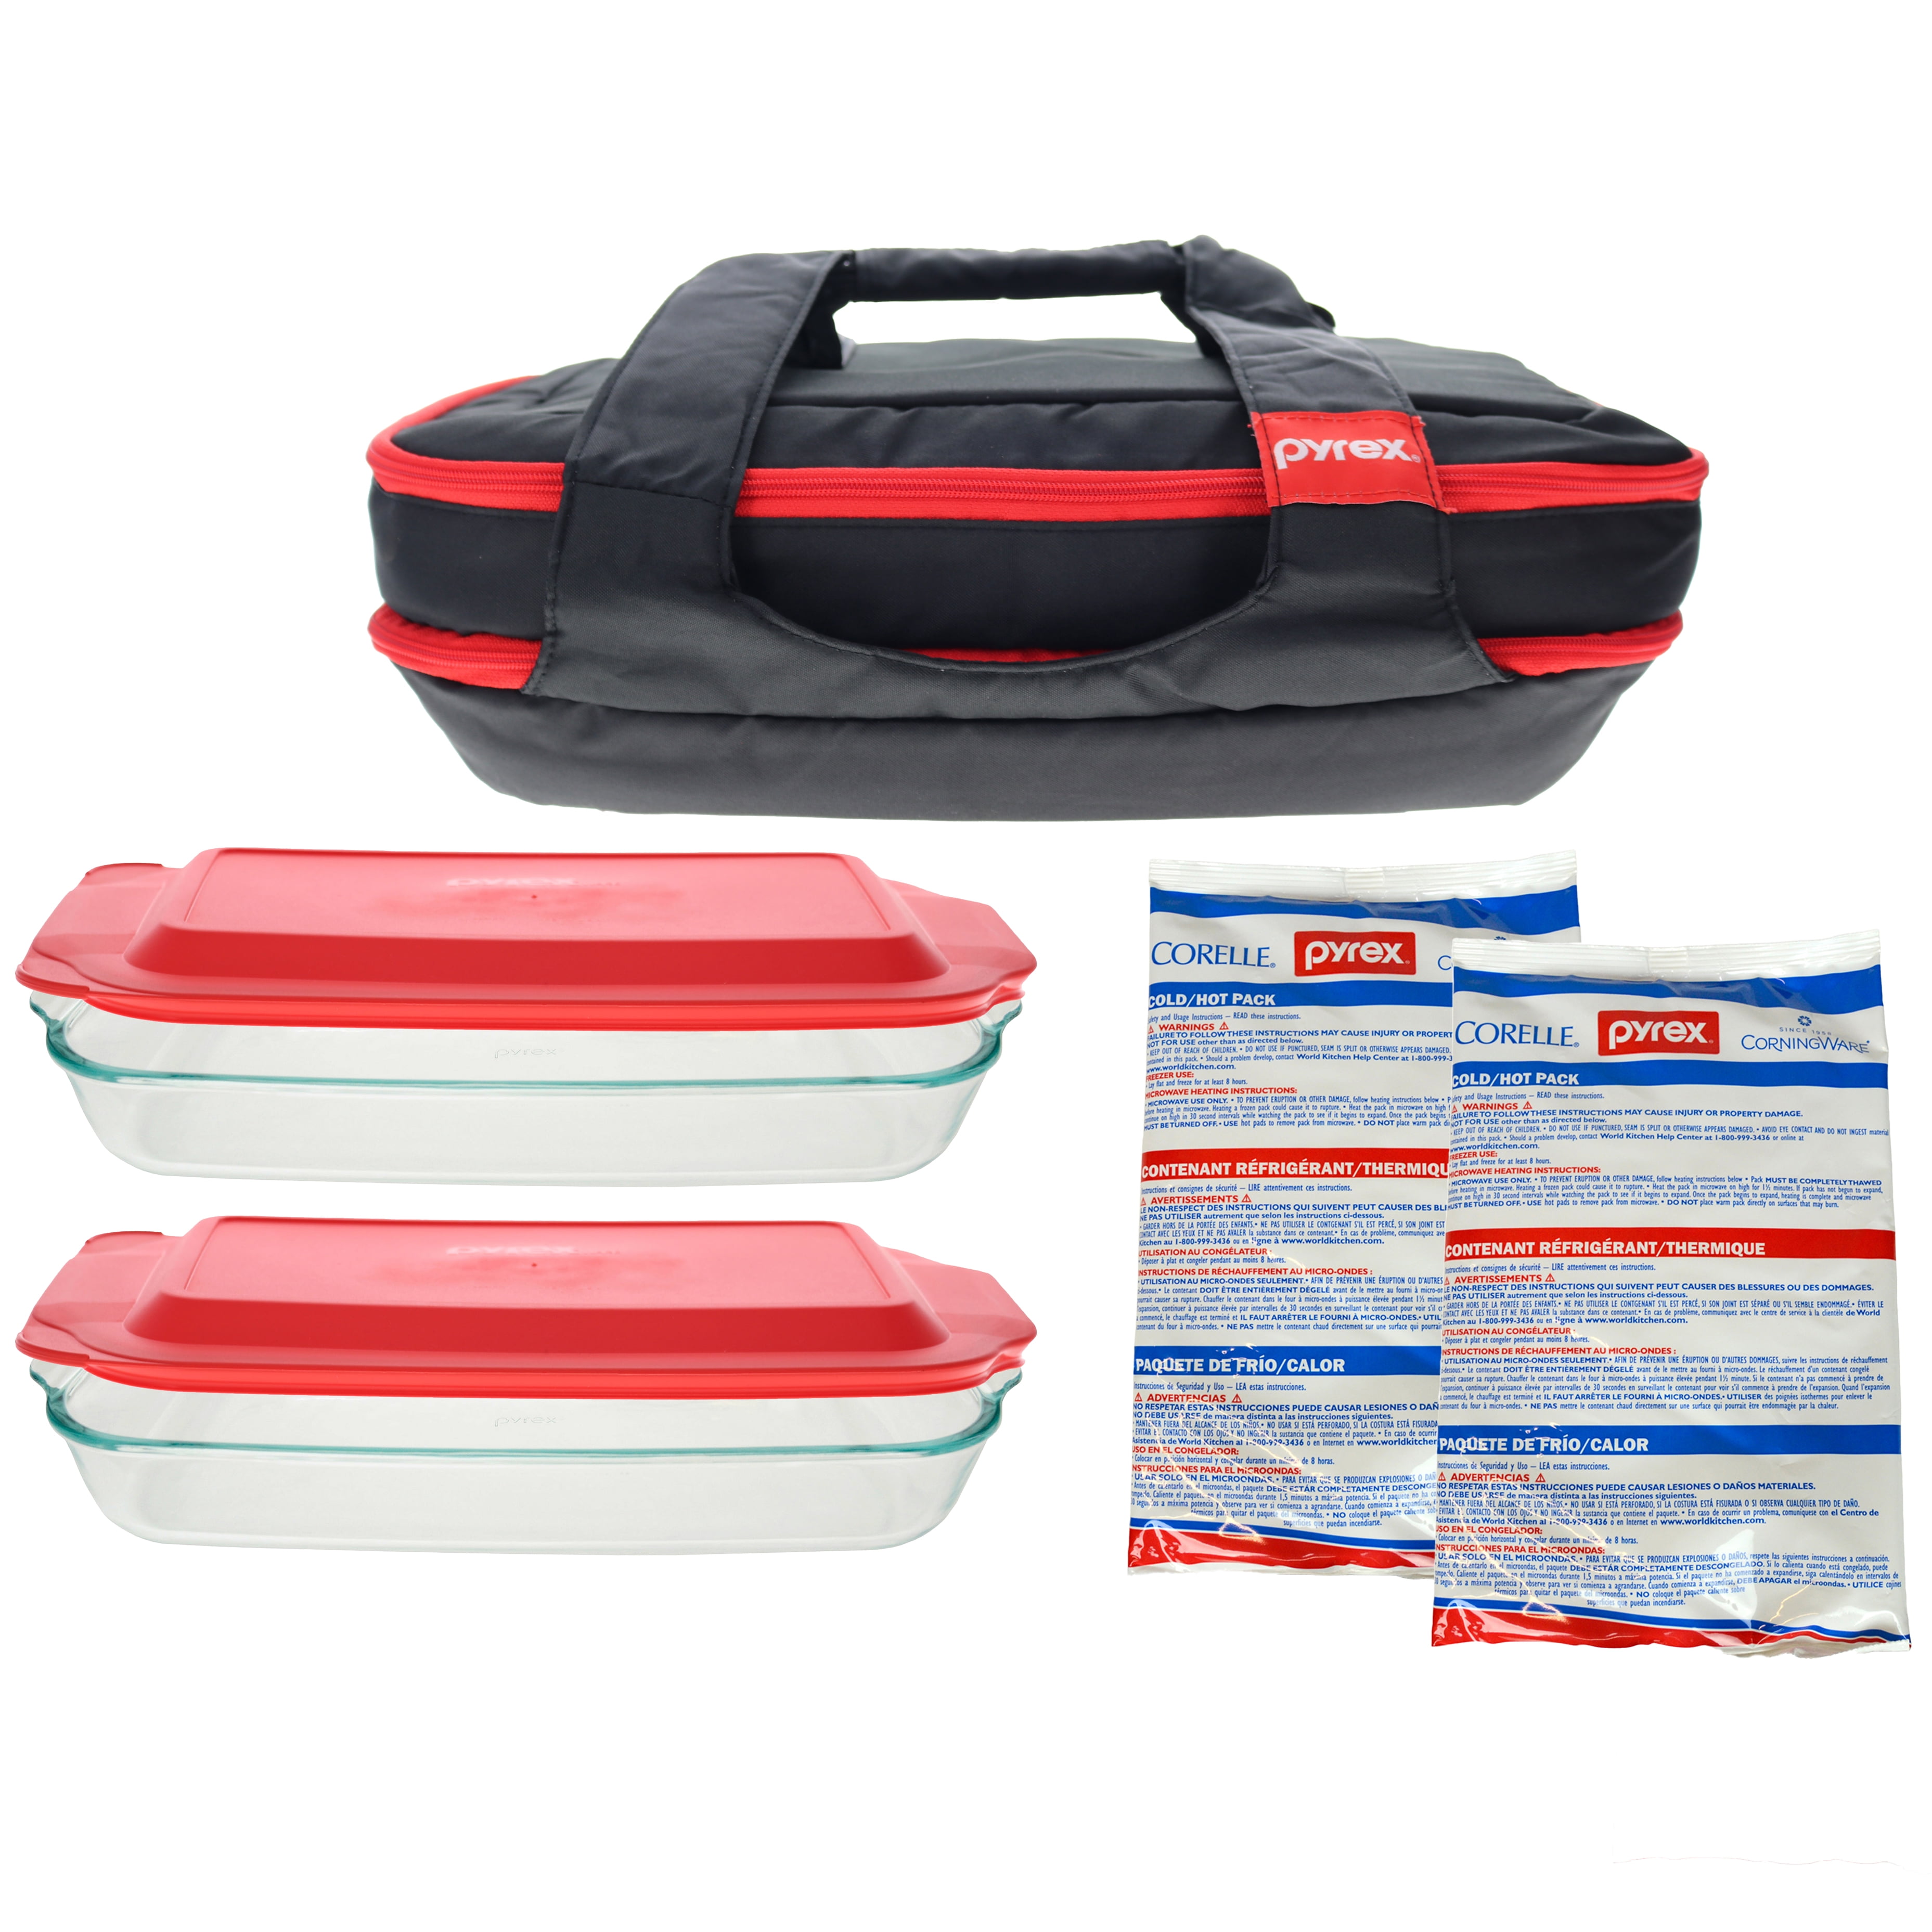 Pyrex Portables Large Hot/Cold Unipack (2-Pack)